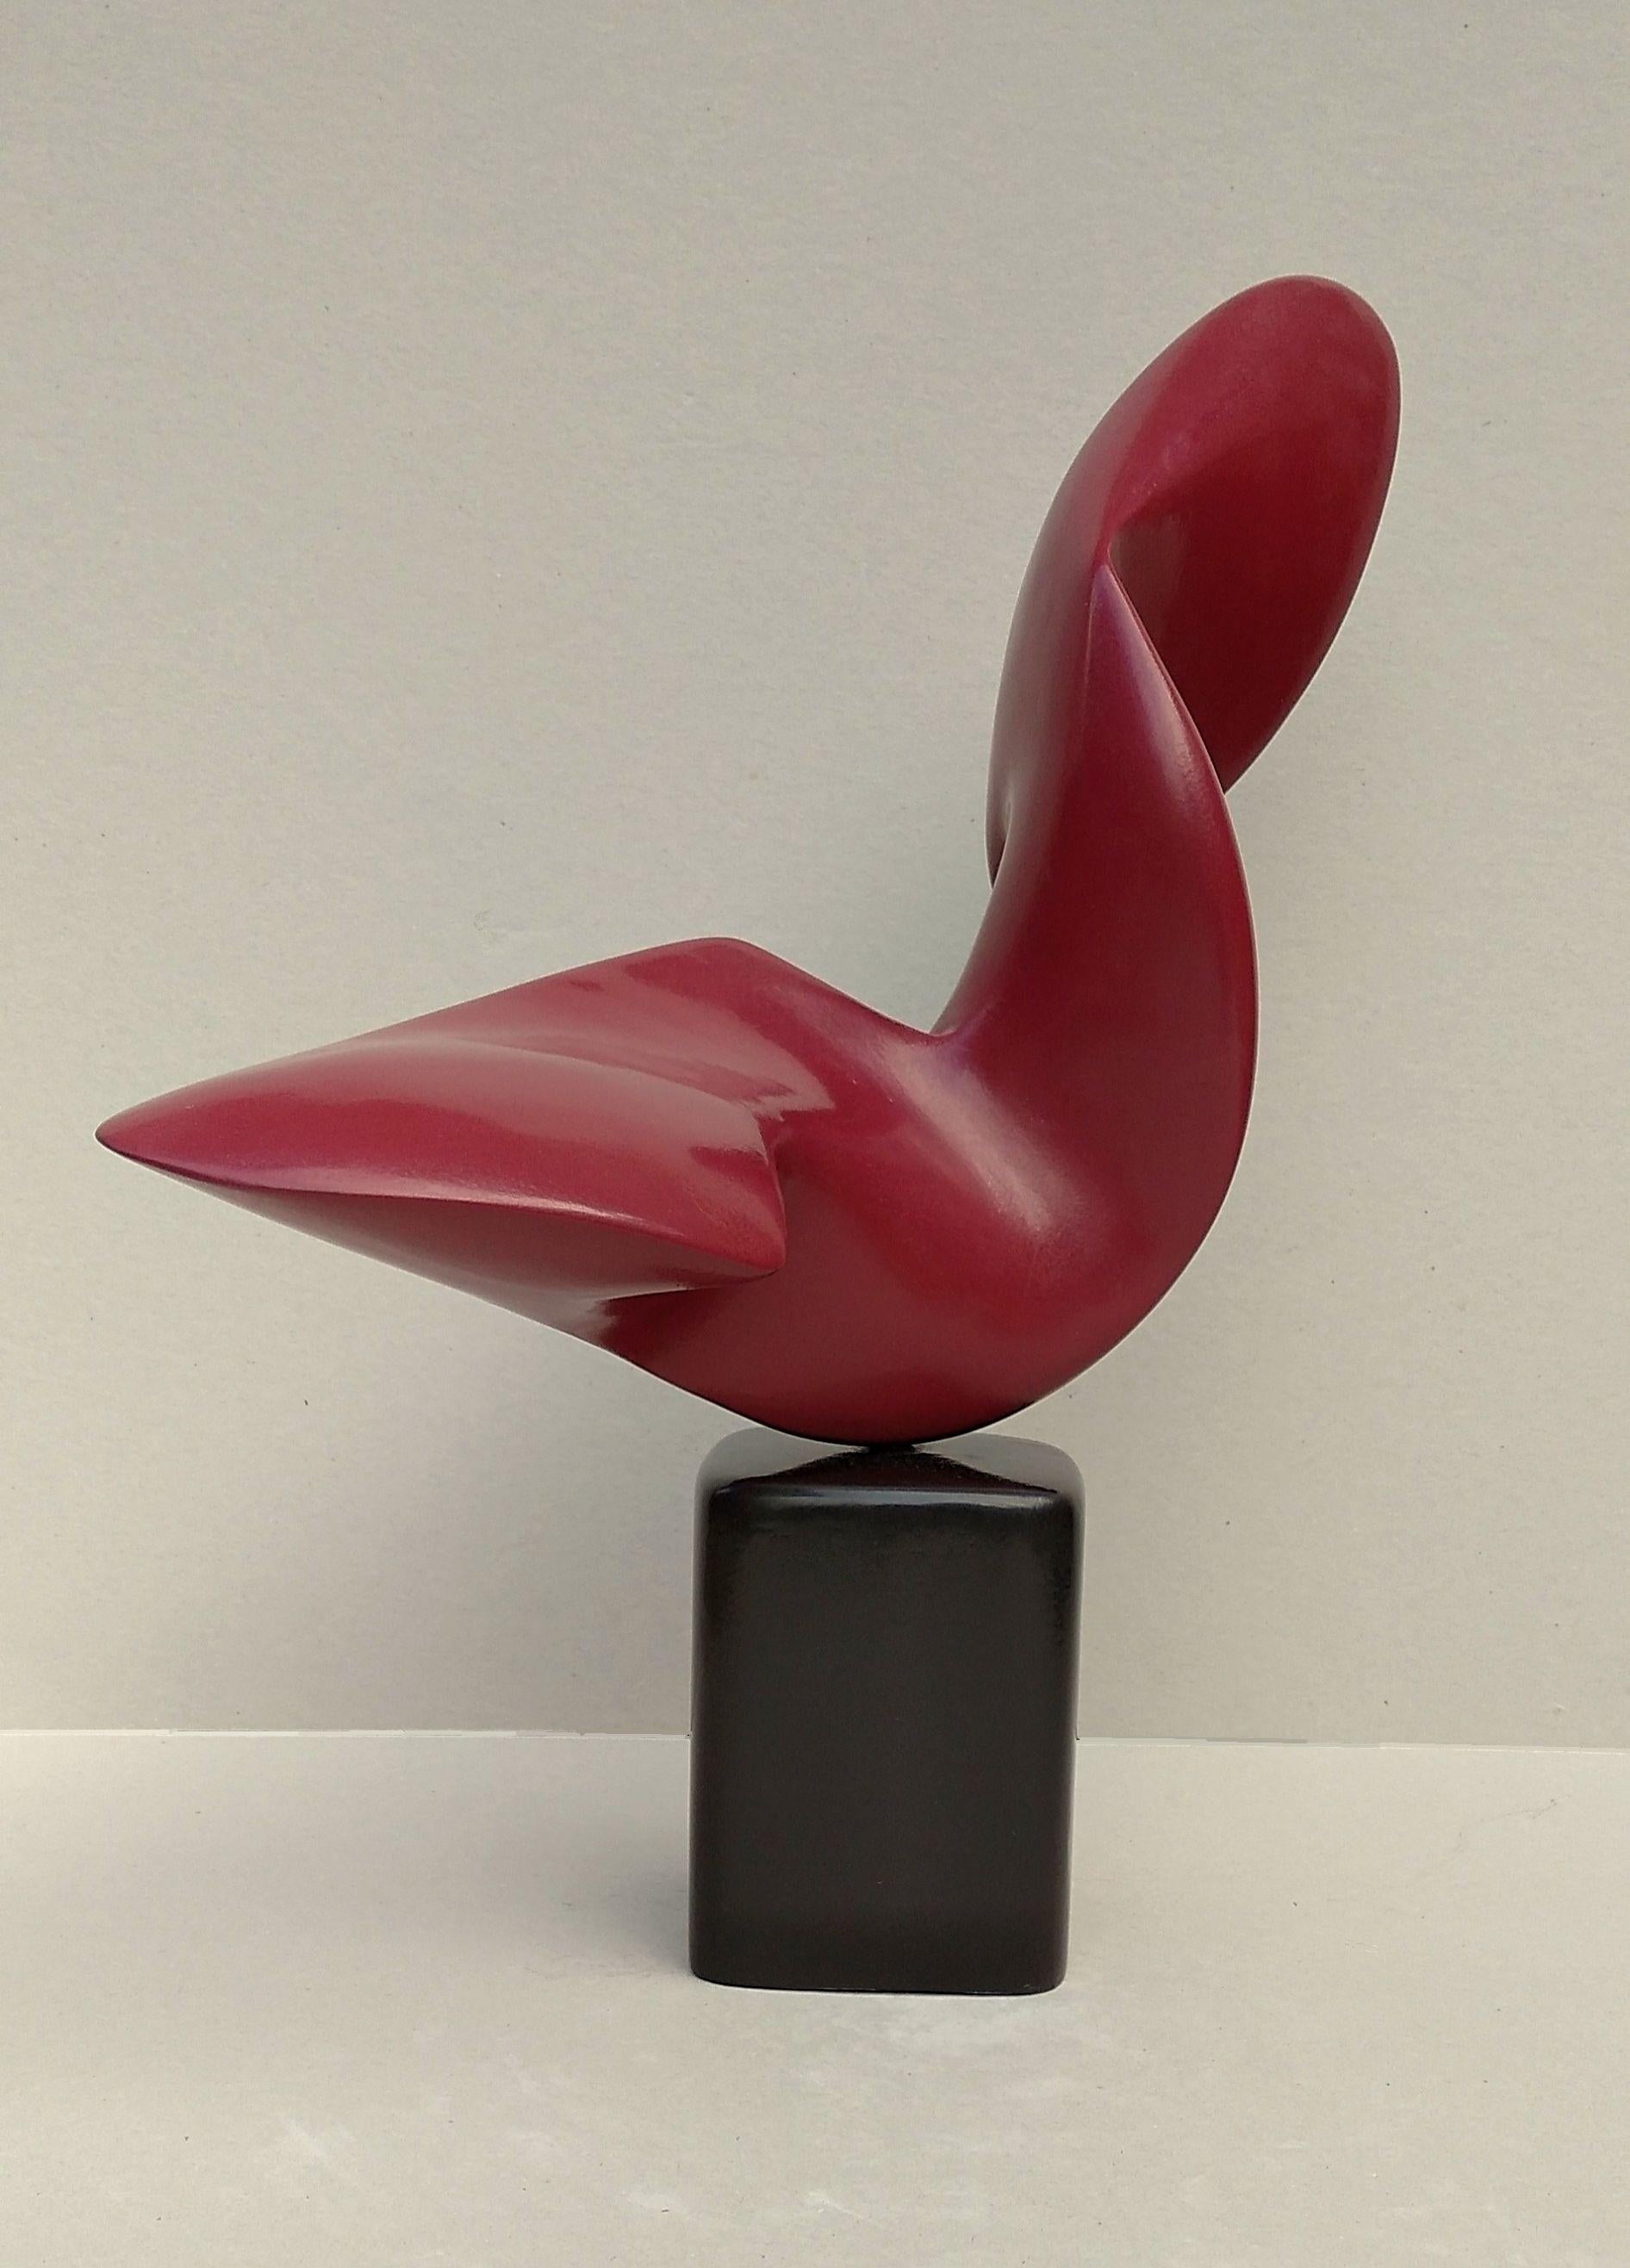 This abstract oak wood sculpture by Lutfi Romhein has been firstly given a patina, then lacquered to highlight its pure lines. Its very professionally lacquered finishing in burgundy red (reference Pantone 187C) gives it a satin appearance and a